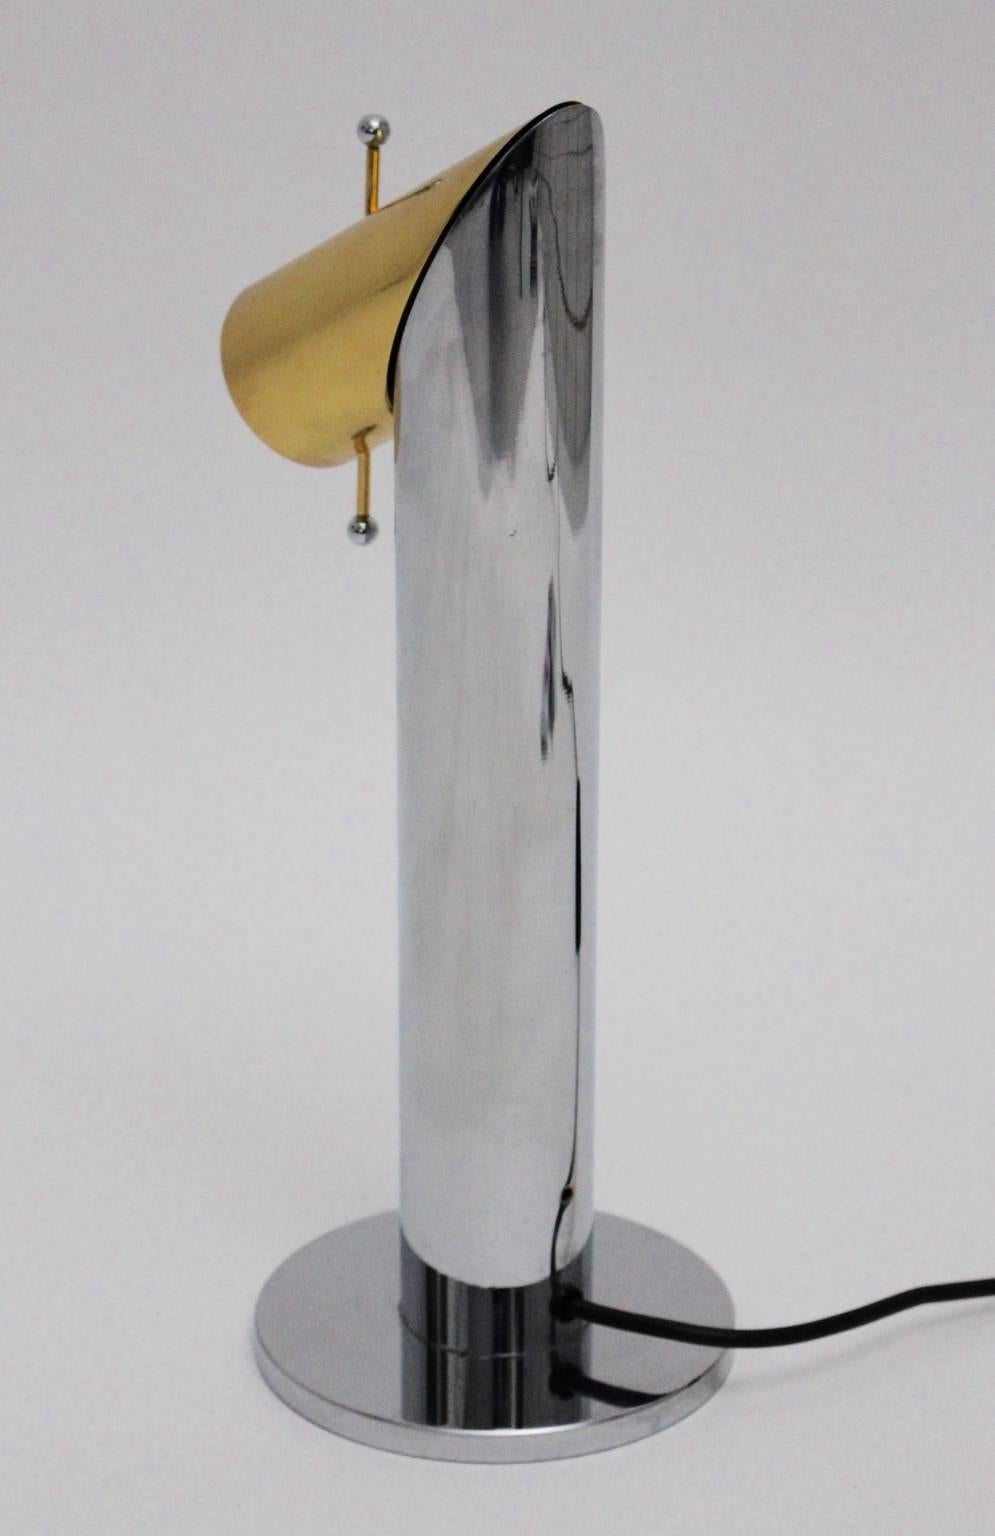 Mid Century Modern vintage table lamp attributed to Nanda Vigo for Arredoluce, Italy, circa 1970.
The head is rotating and adjustable and the light is dimmable.
The vintage table lamp from chromed metal and brass in in very good condition.
One